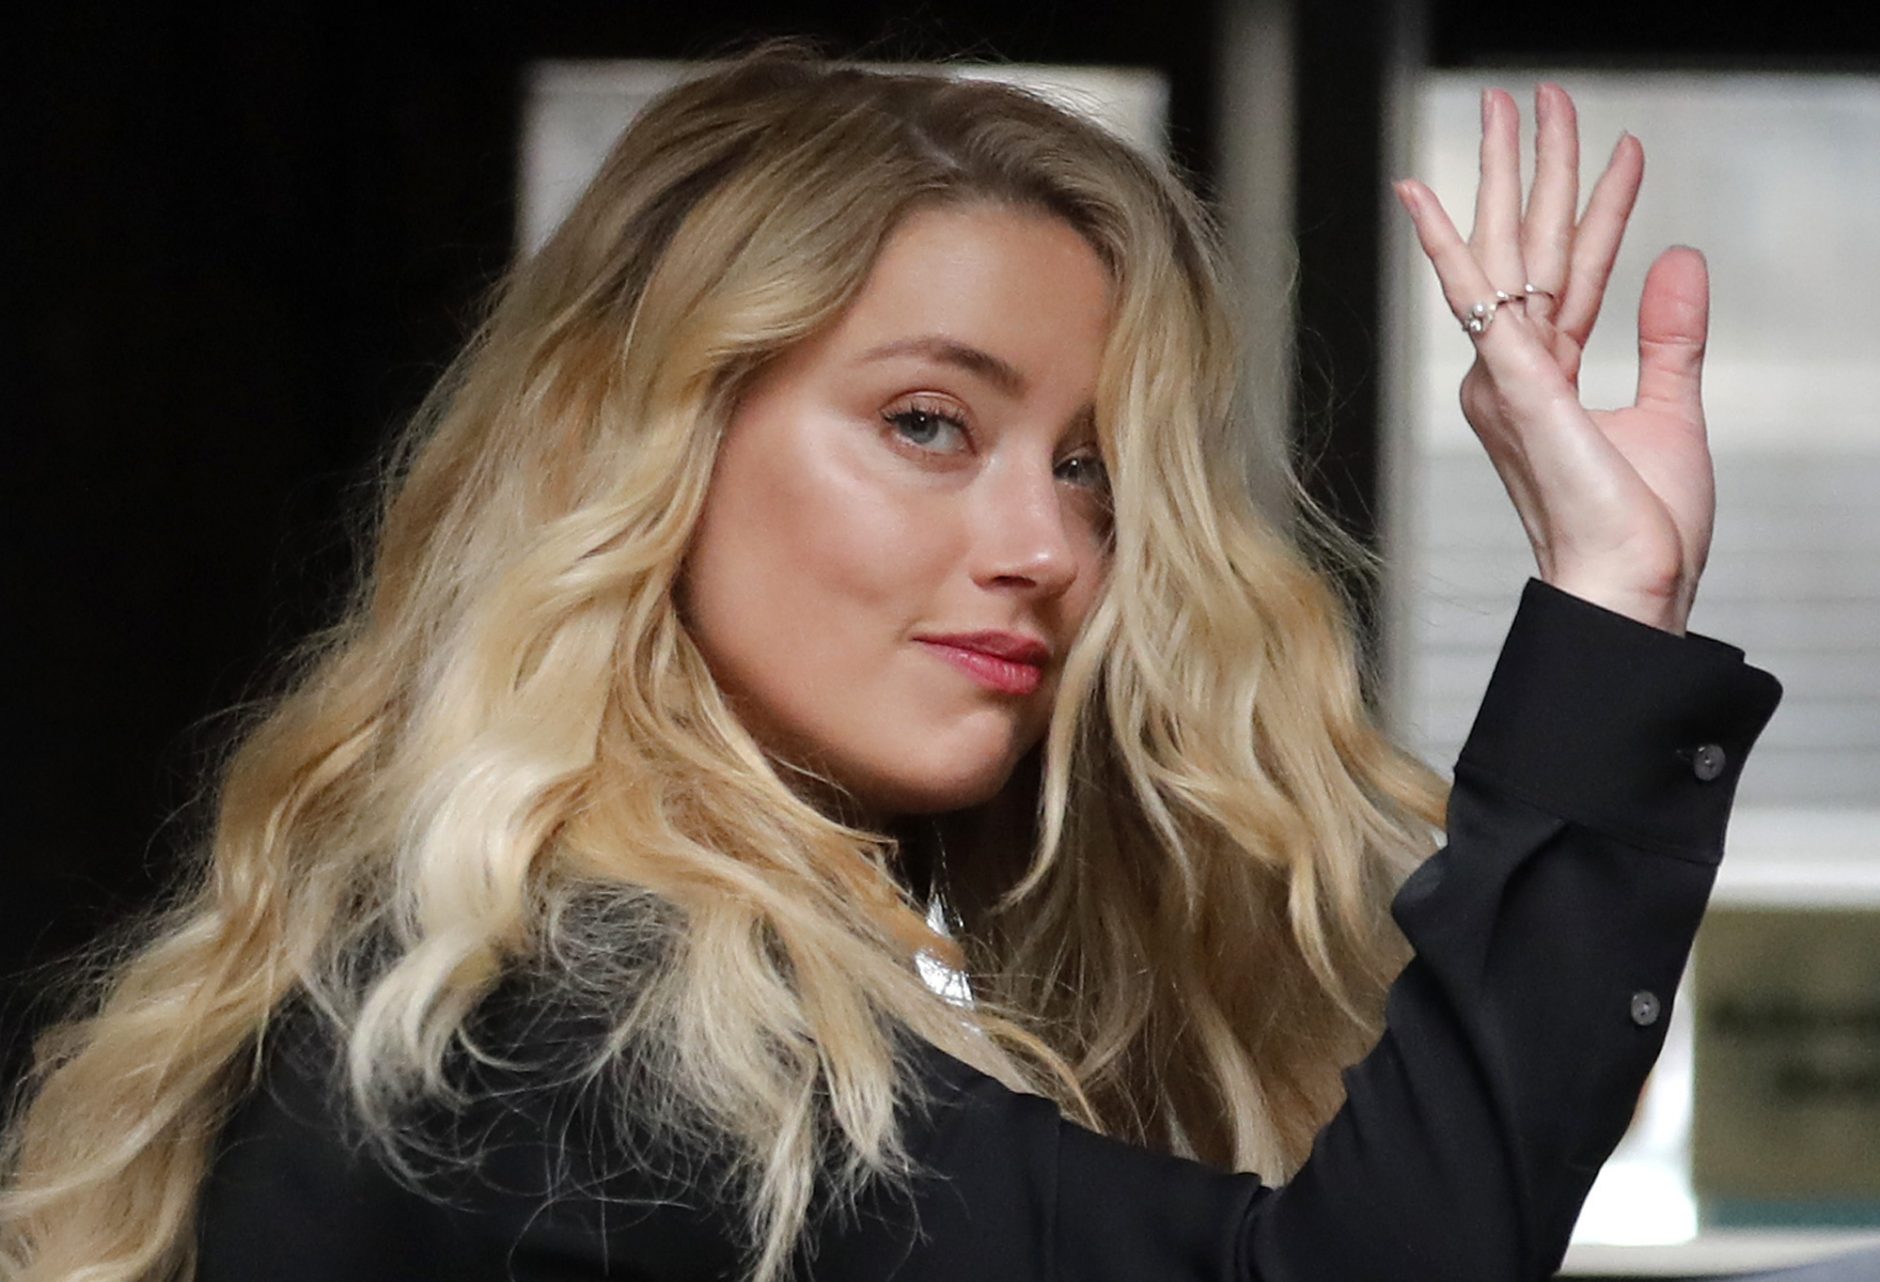 Amber Heard suffers from two personality disorders